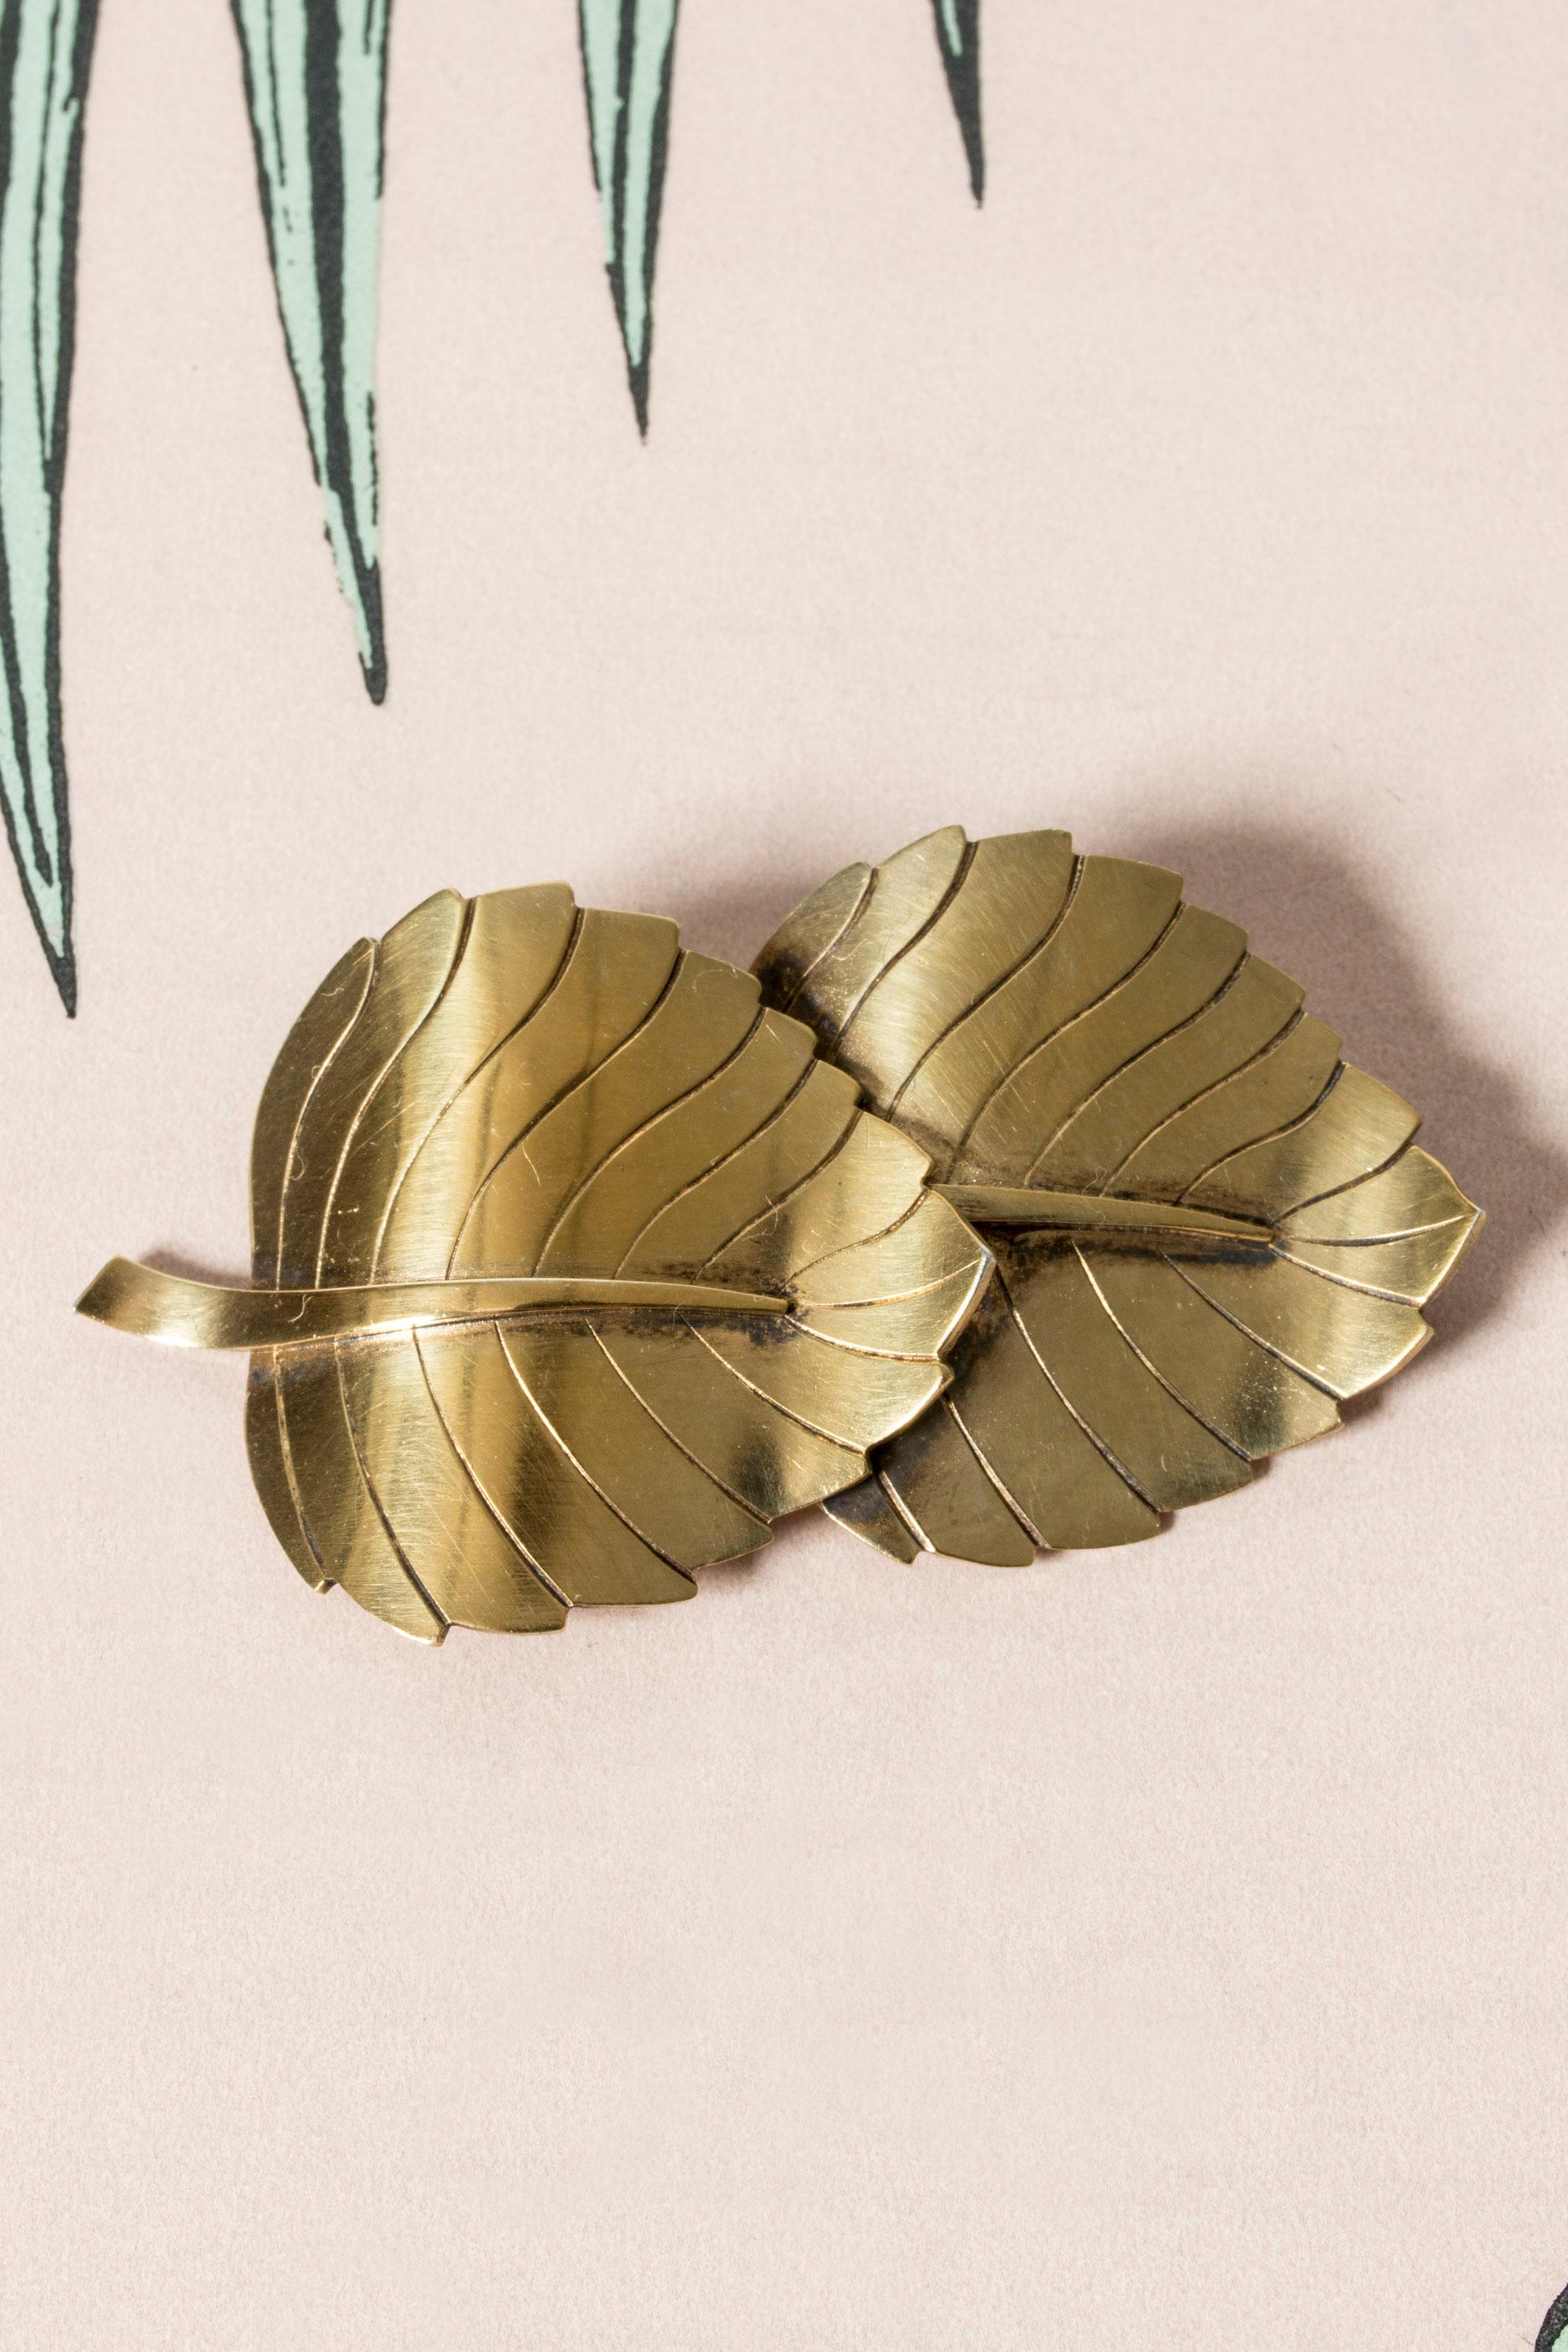 Beautiful gilded silver brooch by Sigurd Persson, in the form of two large leaves. Elegantly made with attention to detail in the veins and billowing form.